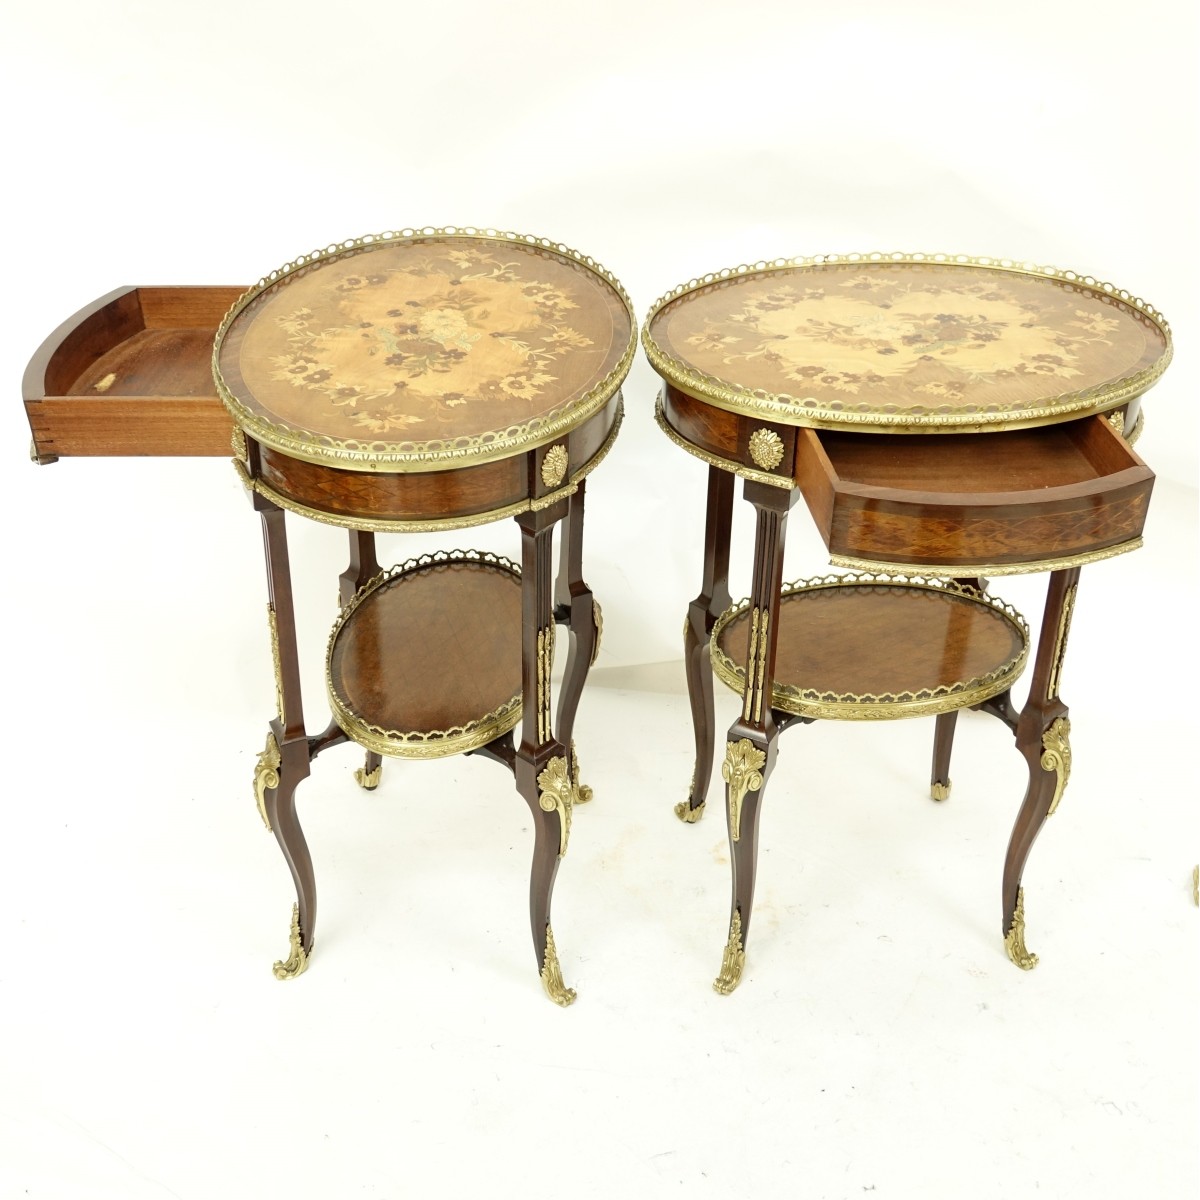 19C Marquetry Tables